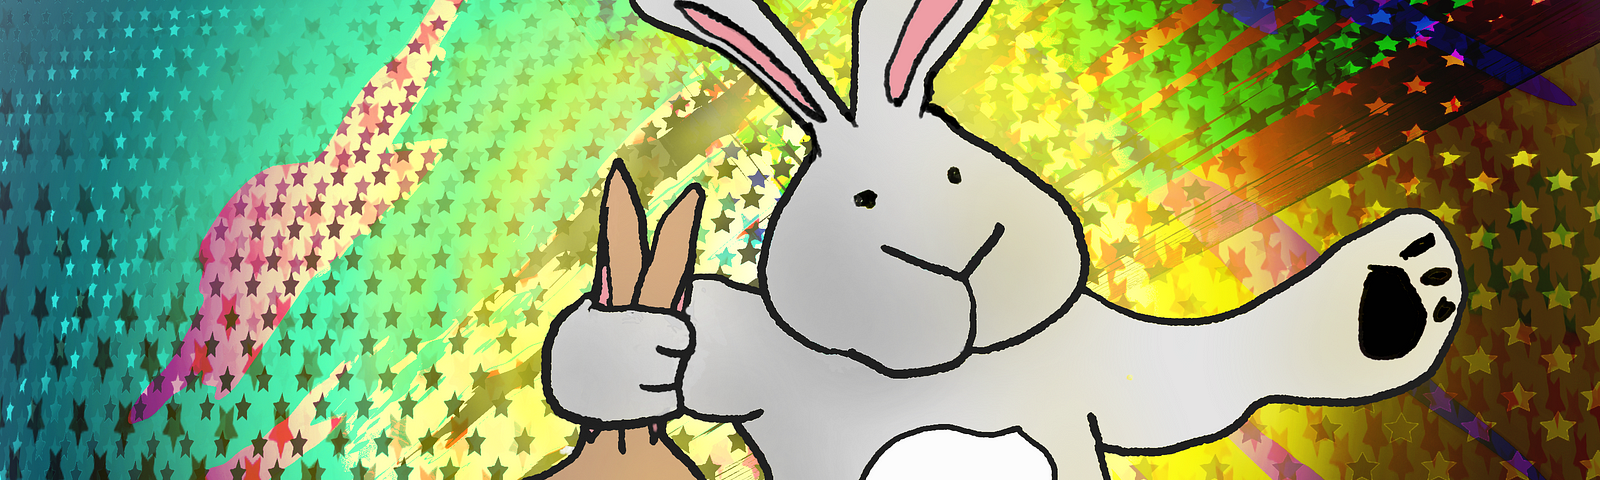 A cartoon image of a gray bunny pulling a brown bunny out of a magician’s top hat. The background is a multi-colored pattern of shadows and stars. Art by Doodleslice 2024